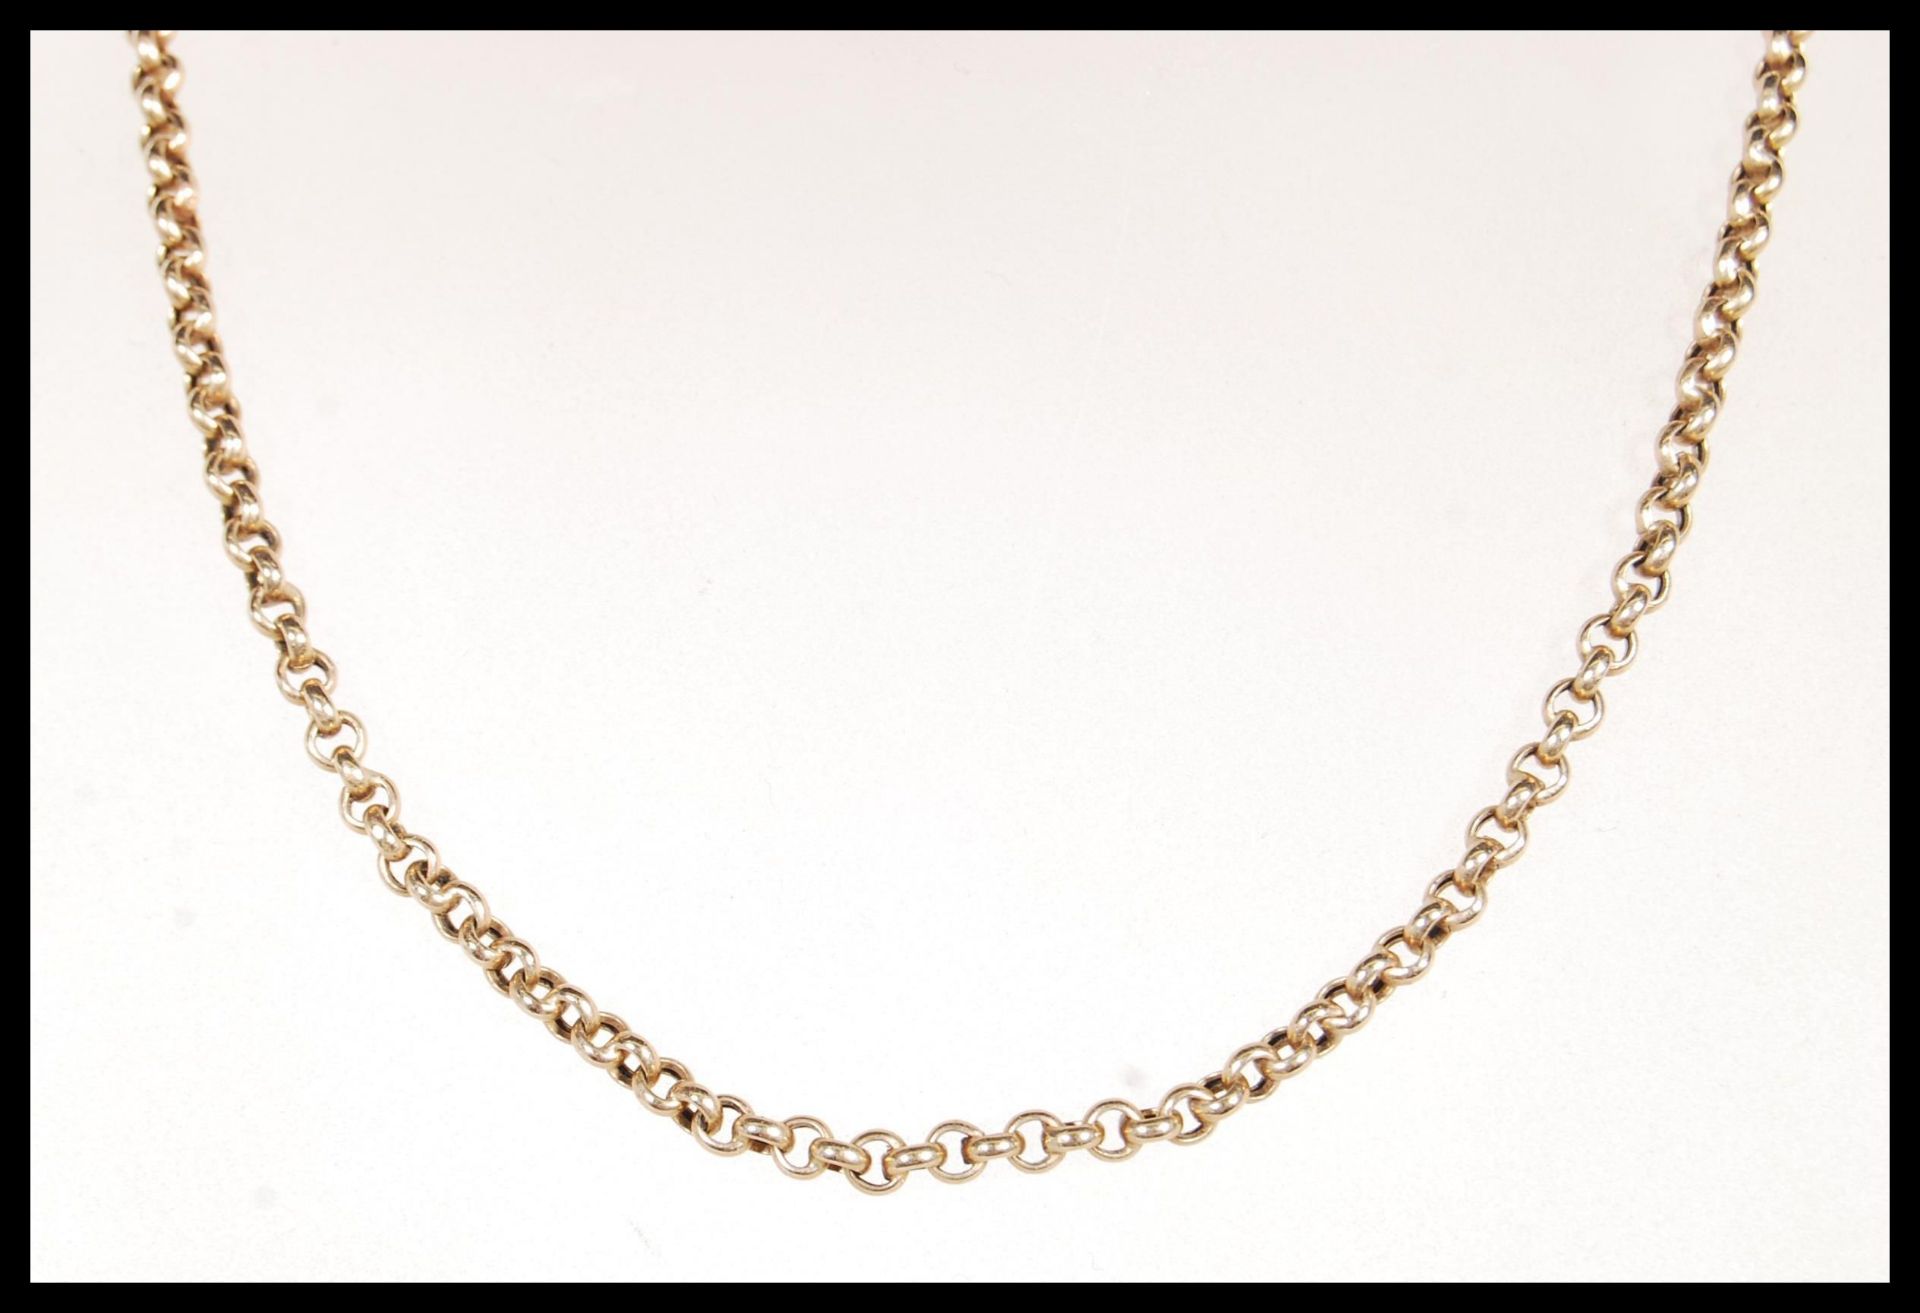 A stamped 375 9ct gold belcher link chain necklace having a spring ring clasp. Measures 16 inches.